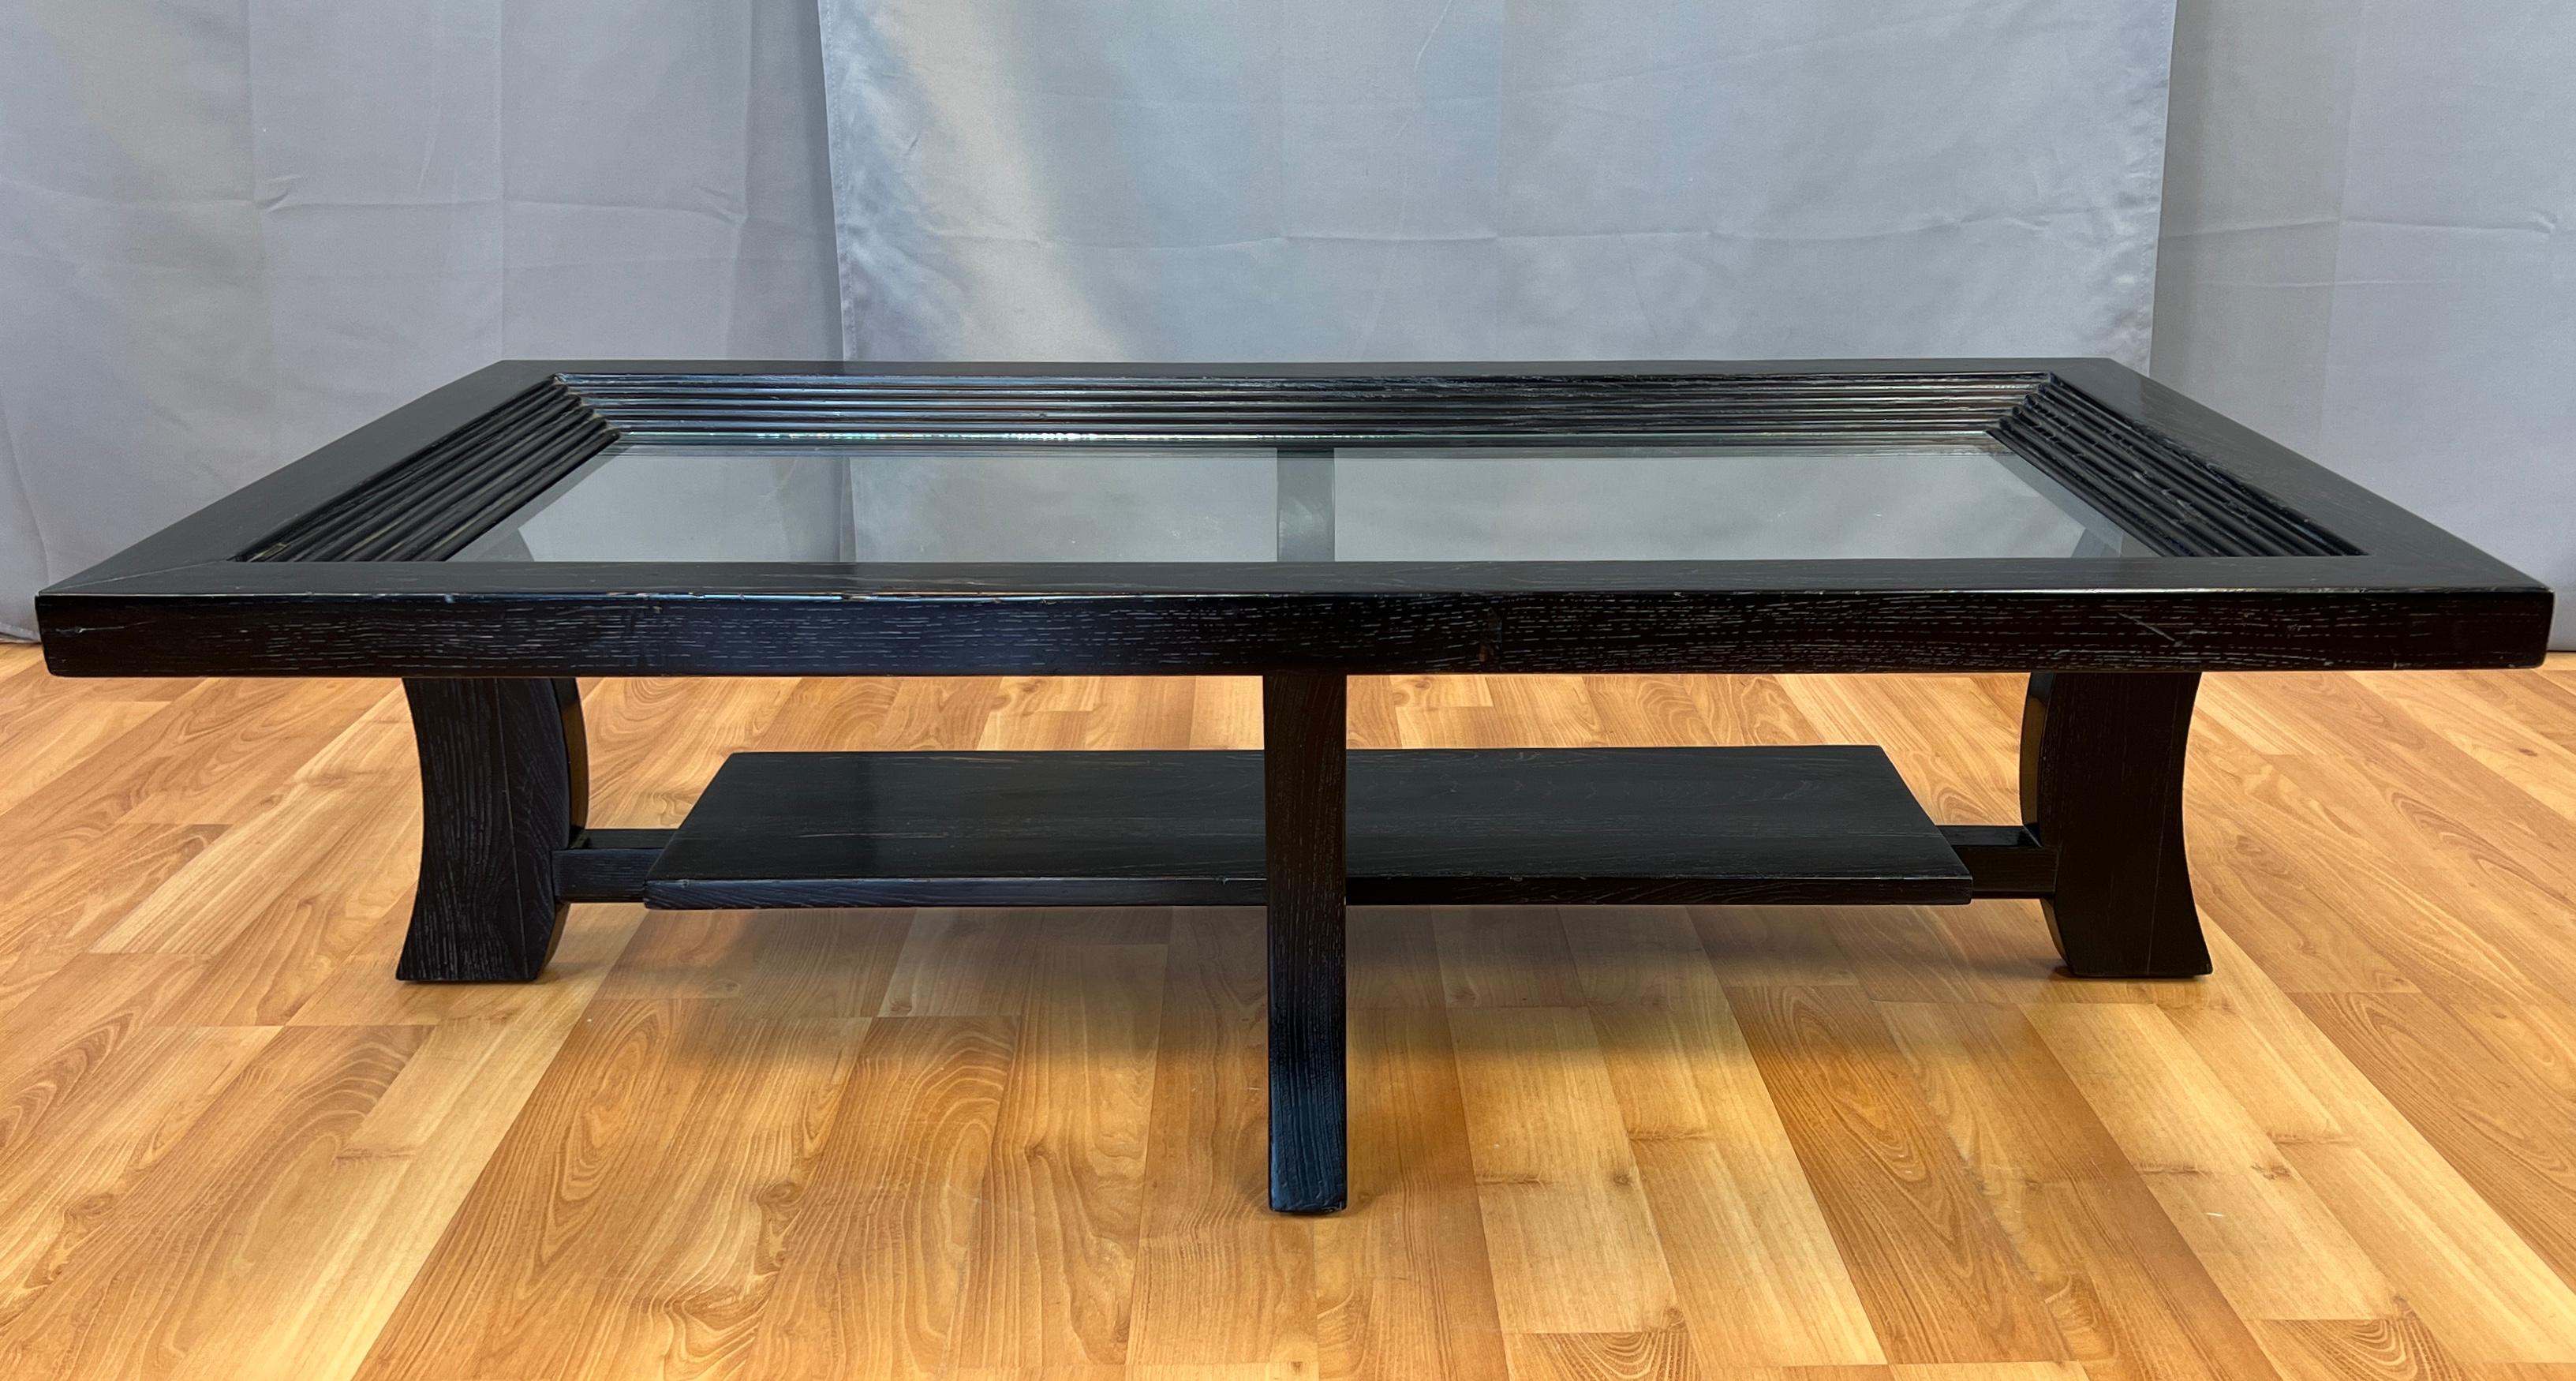 Offered here is a Paul Frankl designed coffee table for Brown Saltman.
Ebonized cerused oak, with glass, table top, and has a step down design, with a shelf below.